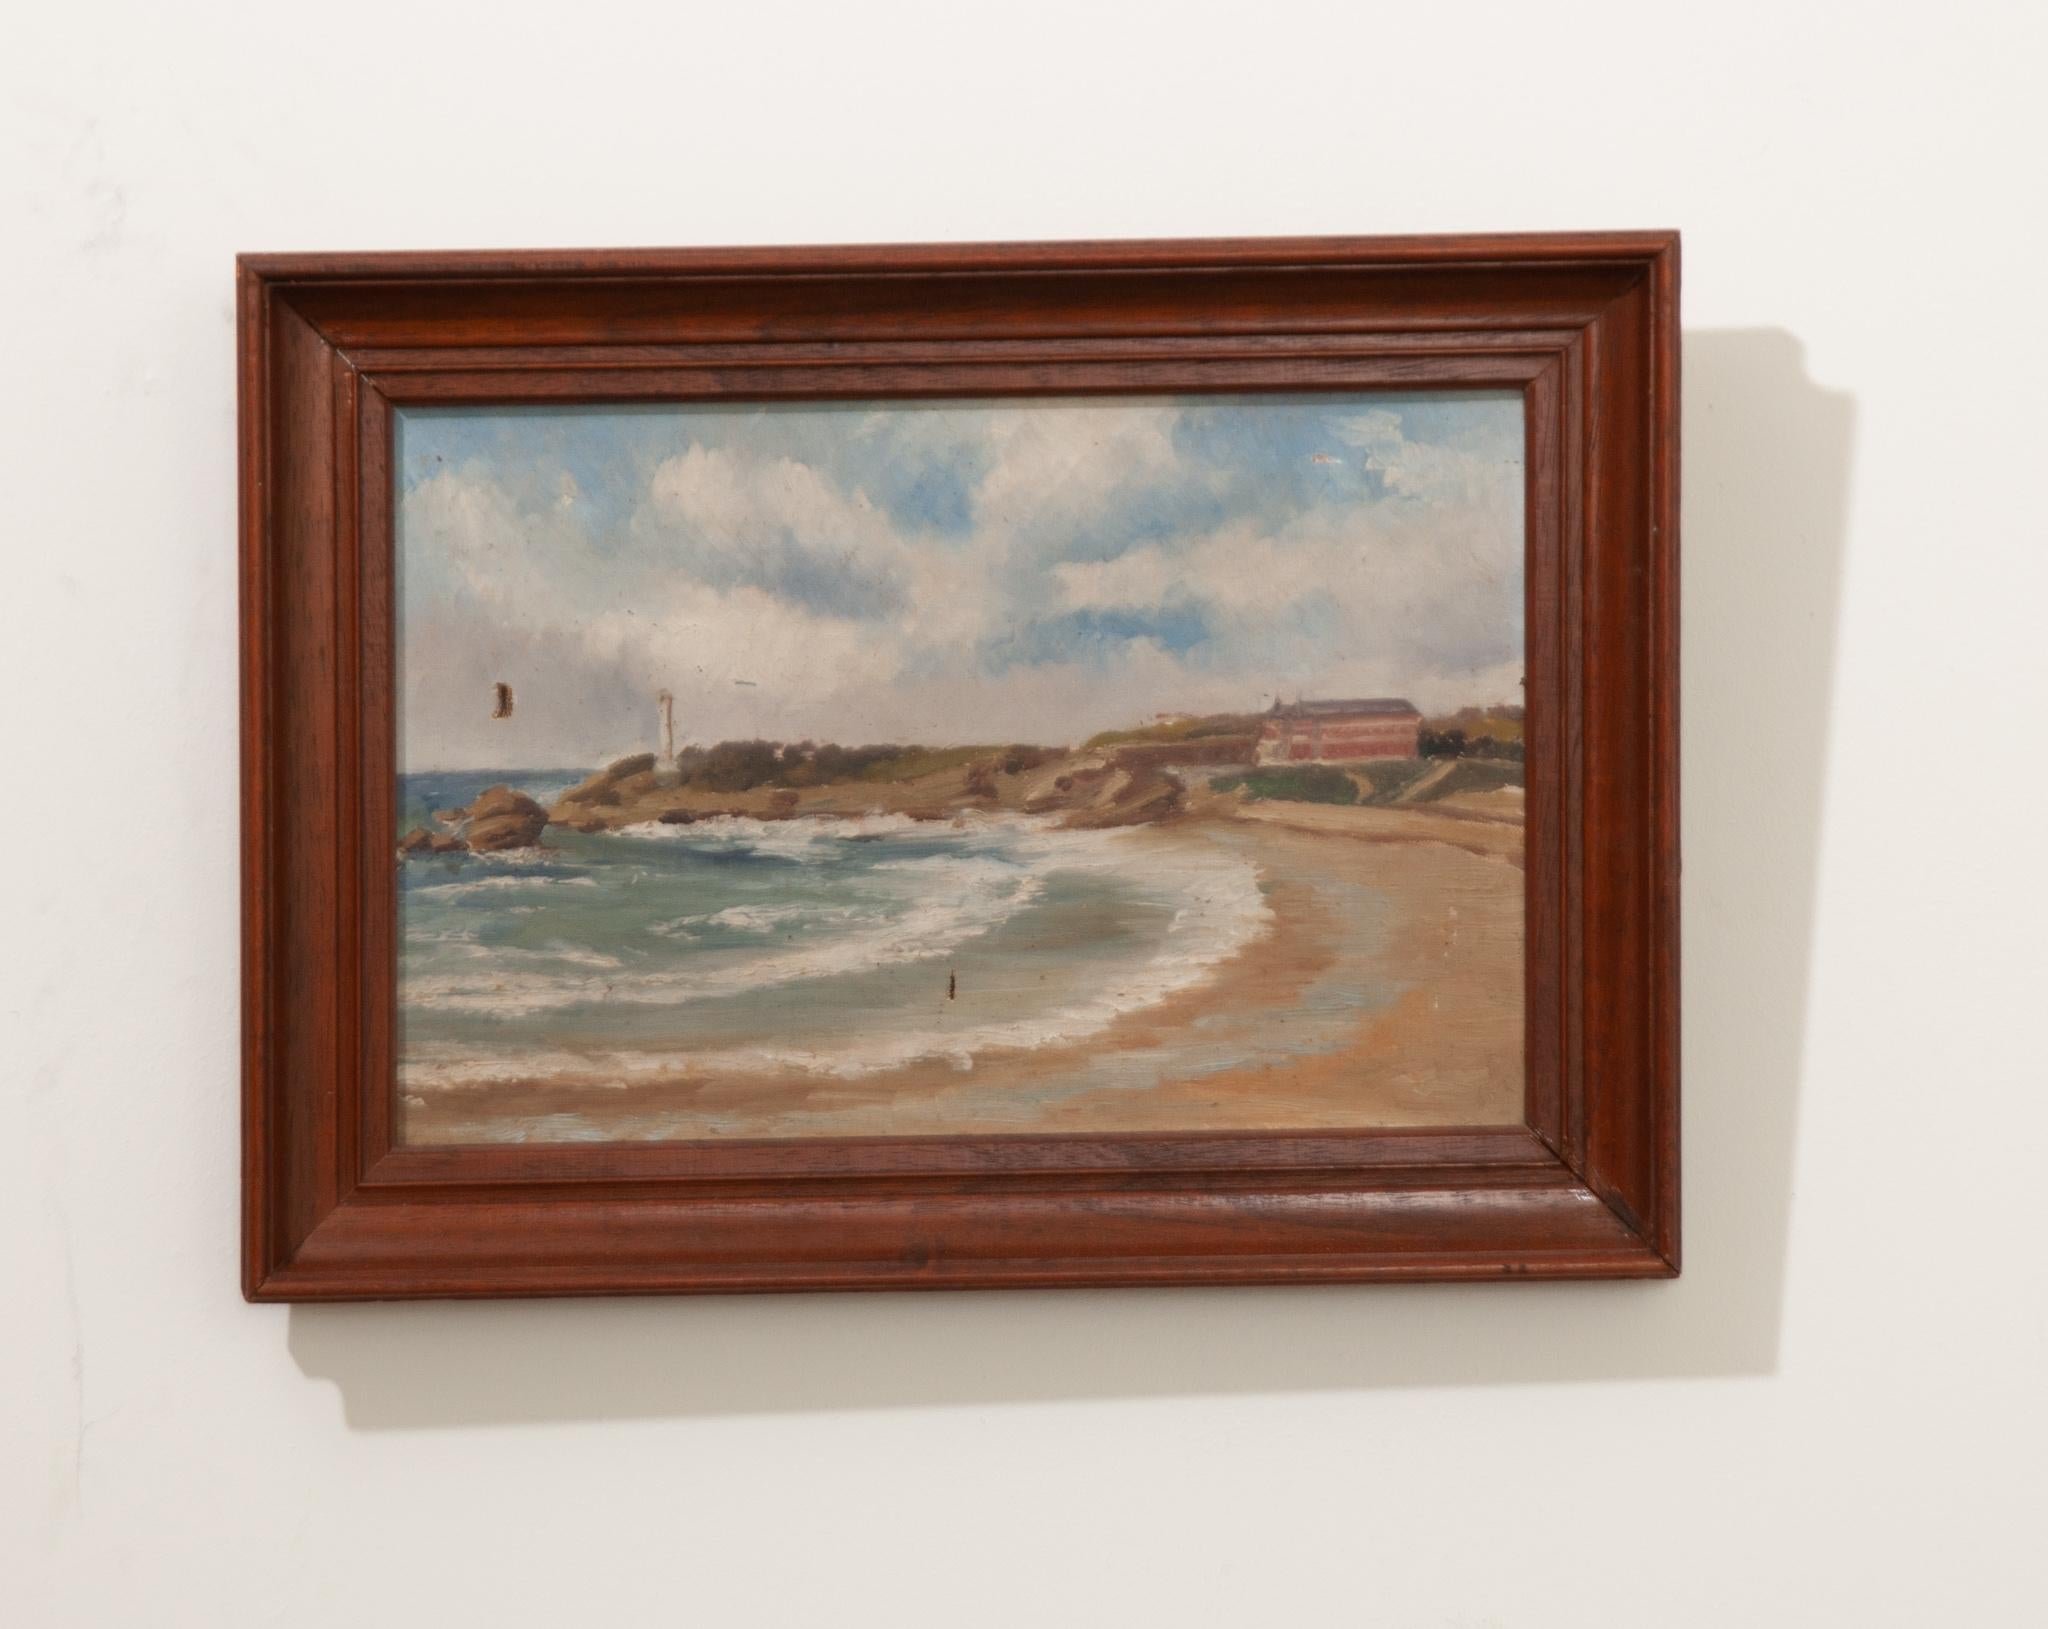 A charming pair of French seascape paintings using muted colors. The texture of the artwork is interesting and complex. Both paintings were painted on canvas and are framed in a solid oak frame. There are some damages to the canvas, be sure to view